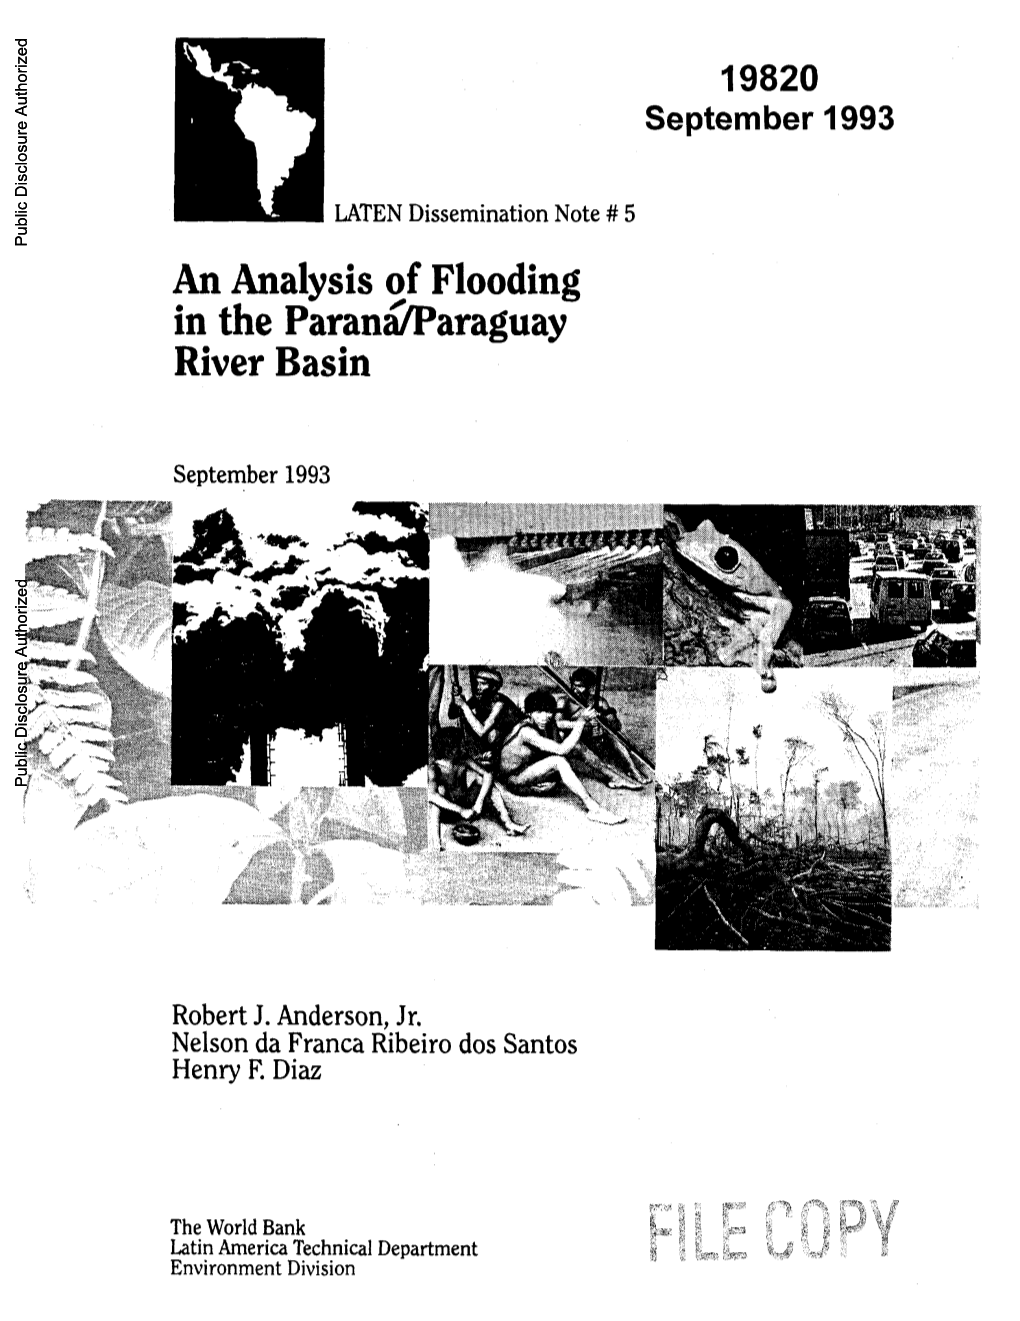 Of Flooding in the Parana'/Paraguay River Basin